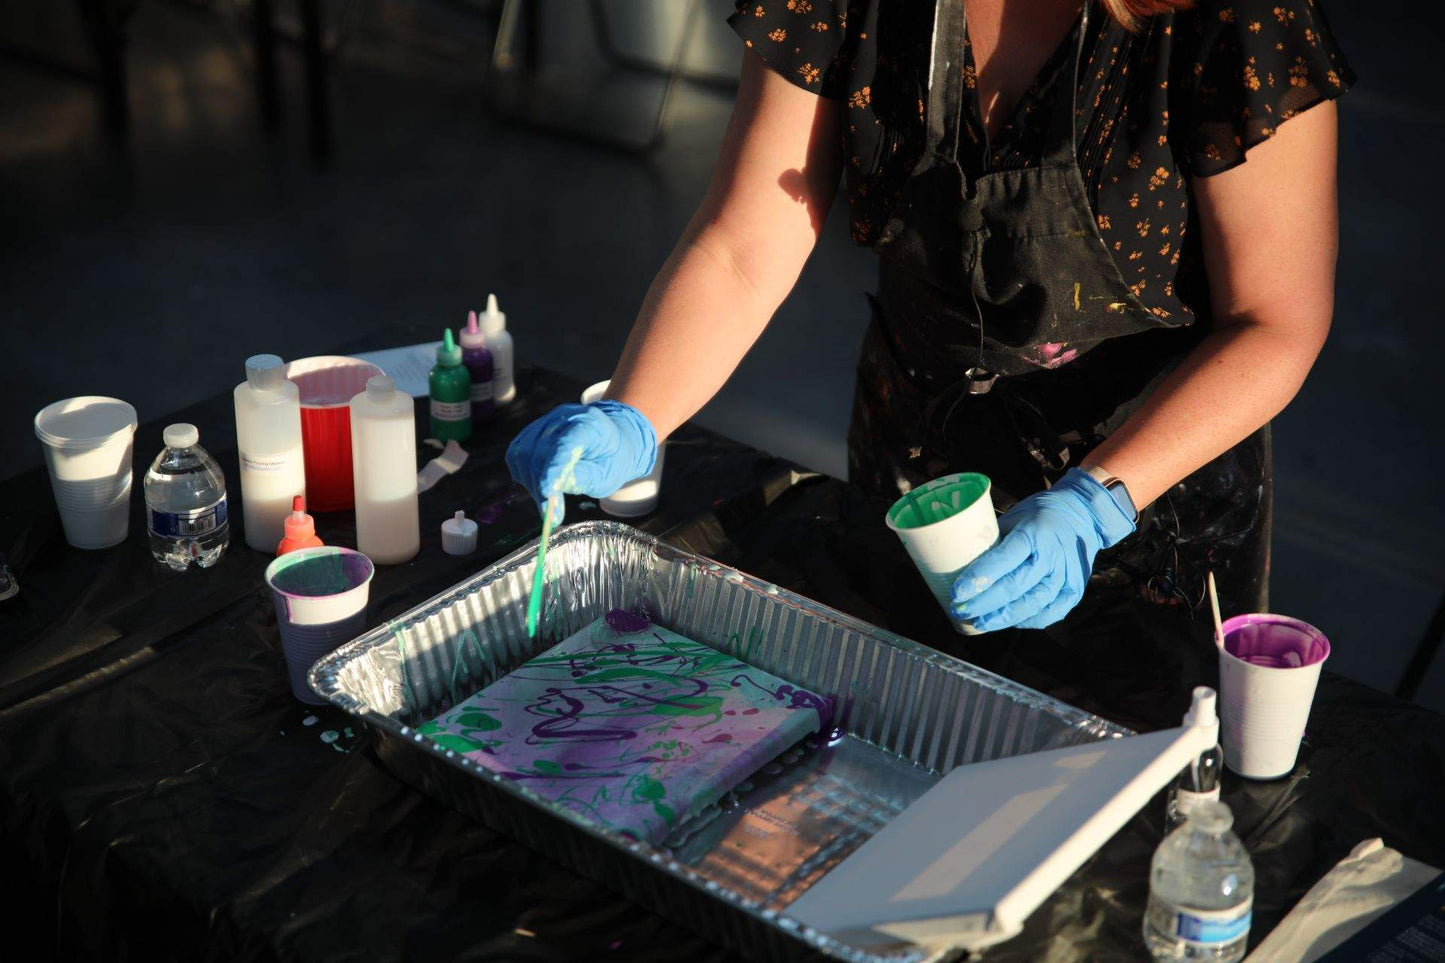 Sun, Feb 6, 12-2p "Acrylic Poured" Private Kids Painting Party